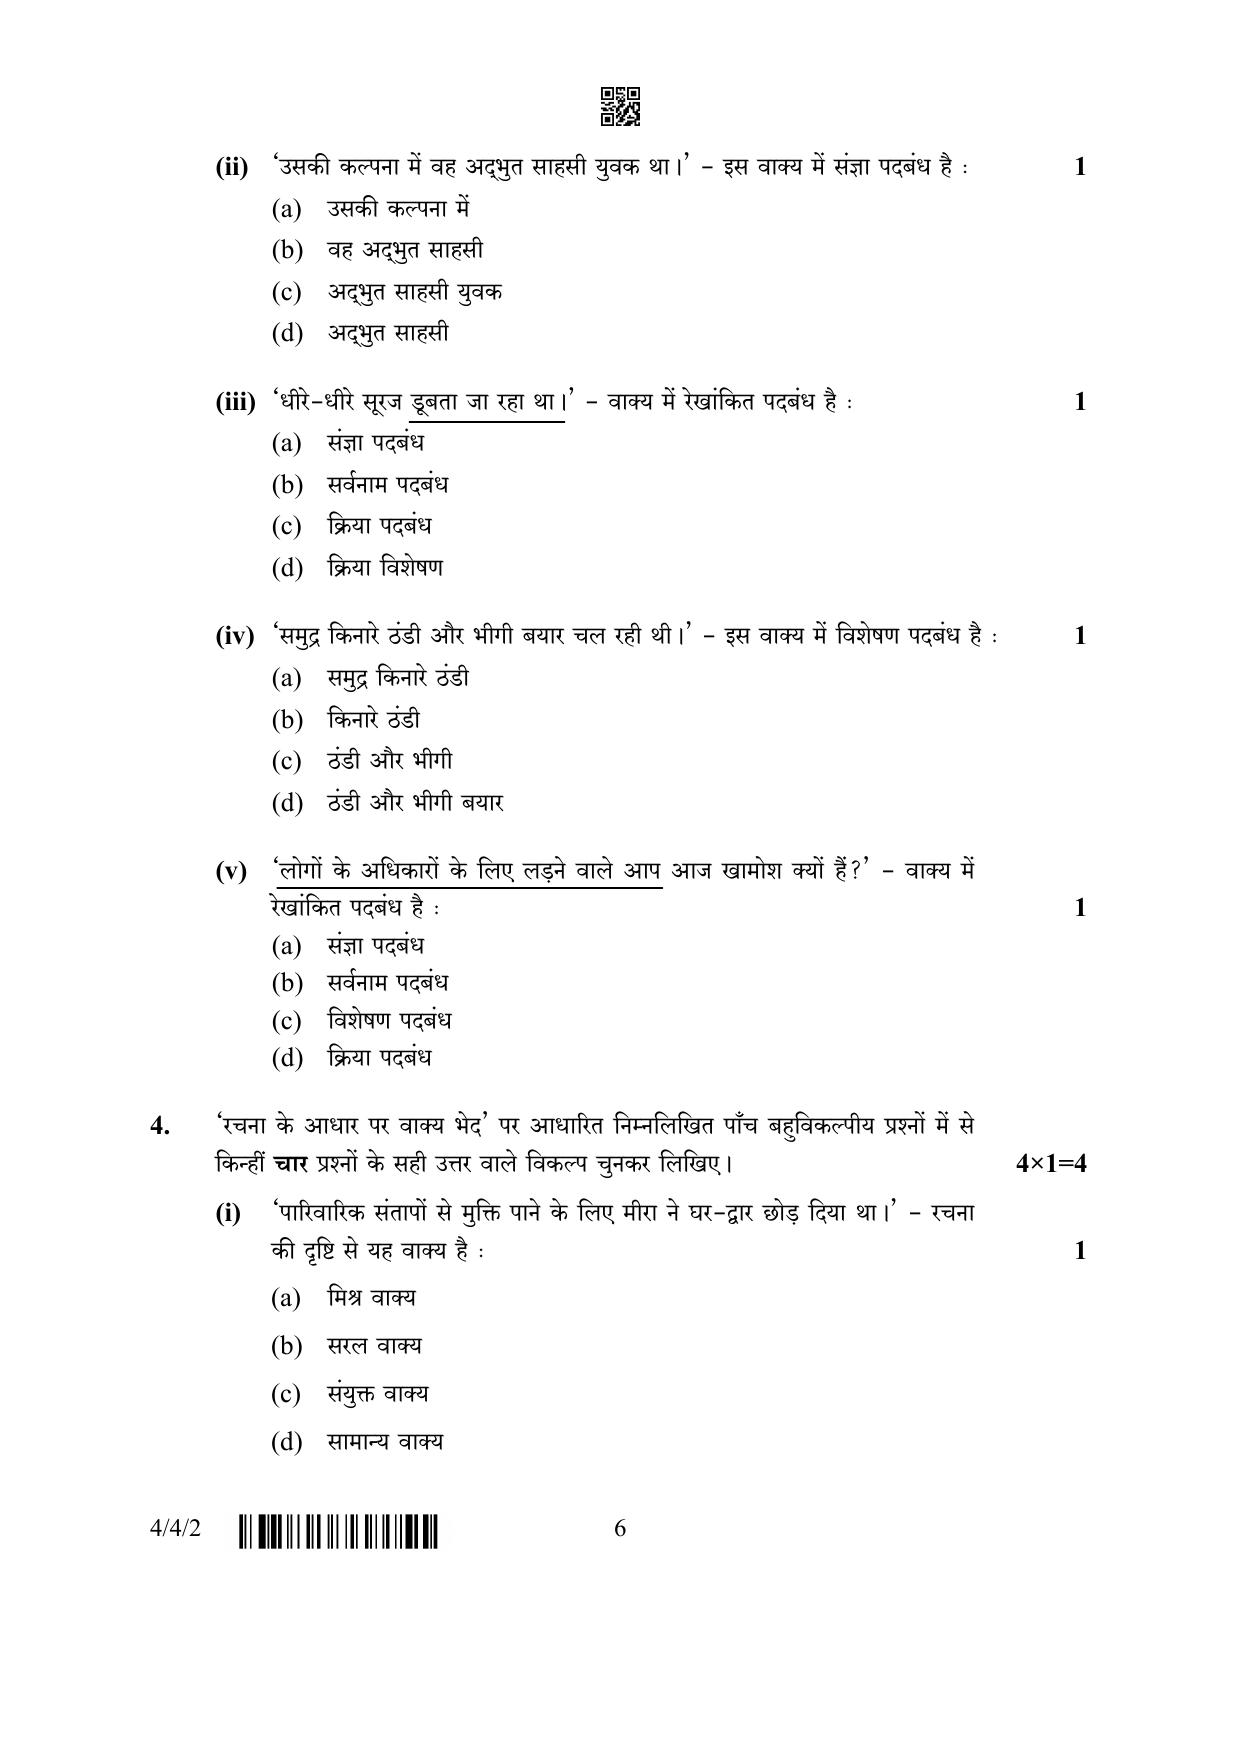 CBSE Class 10 4-4-2 Hindi B 2023 Question Paper - Page 6